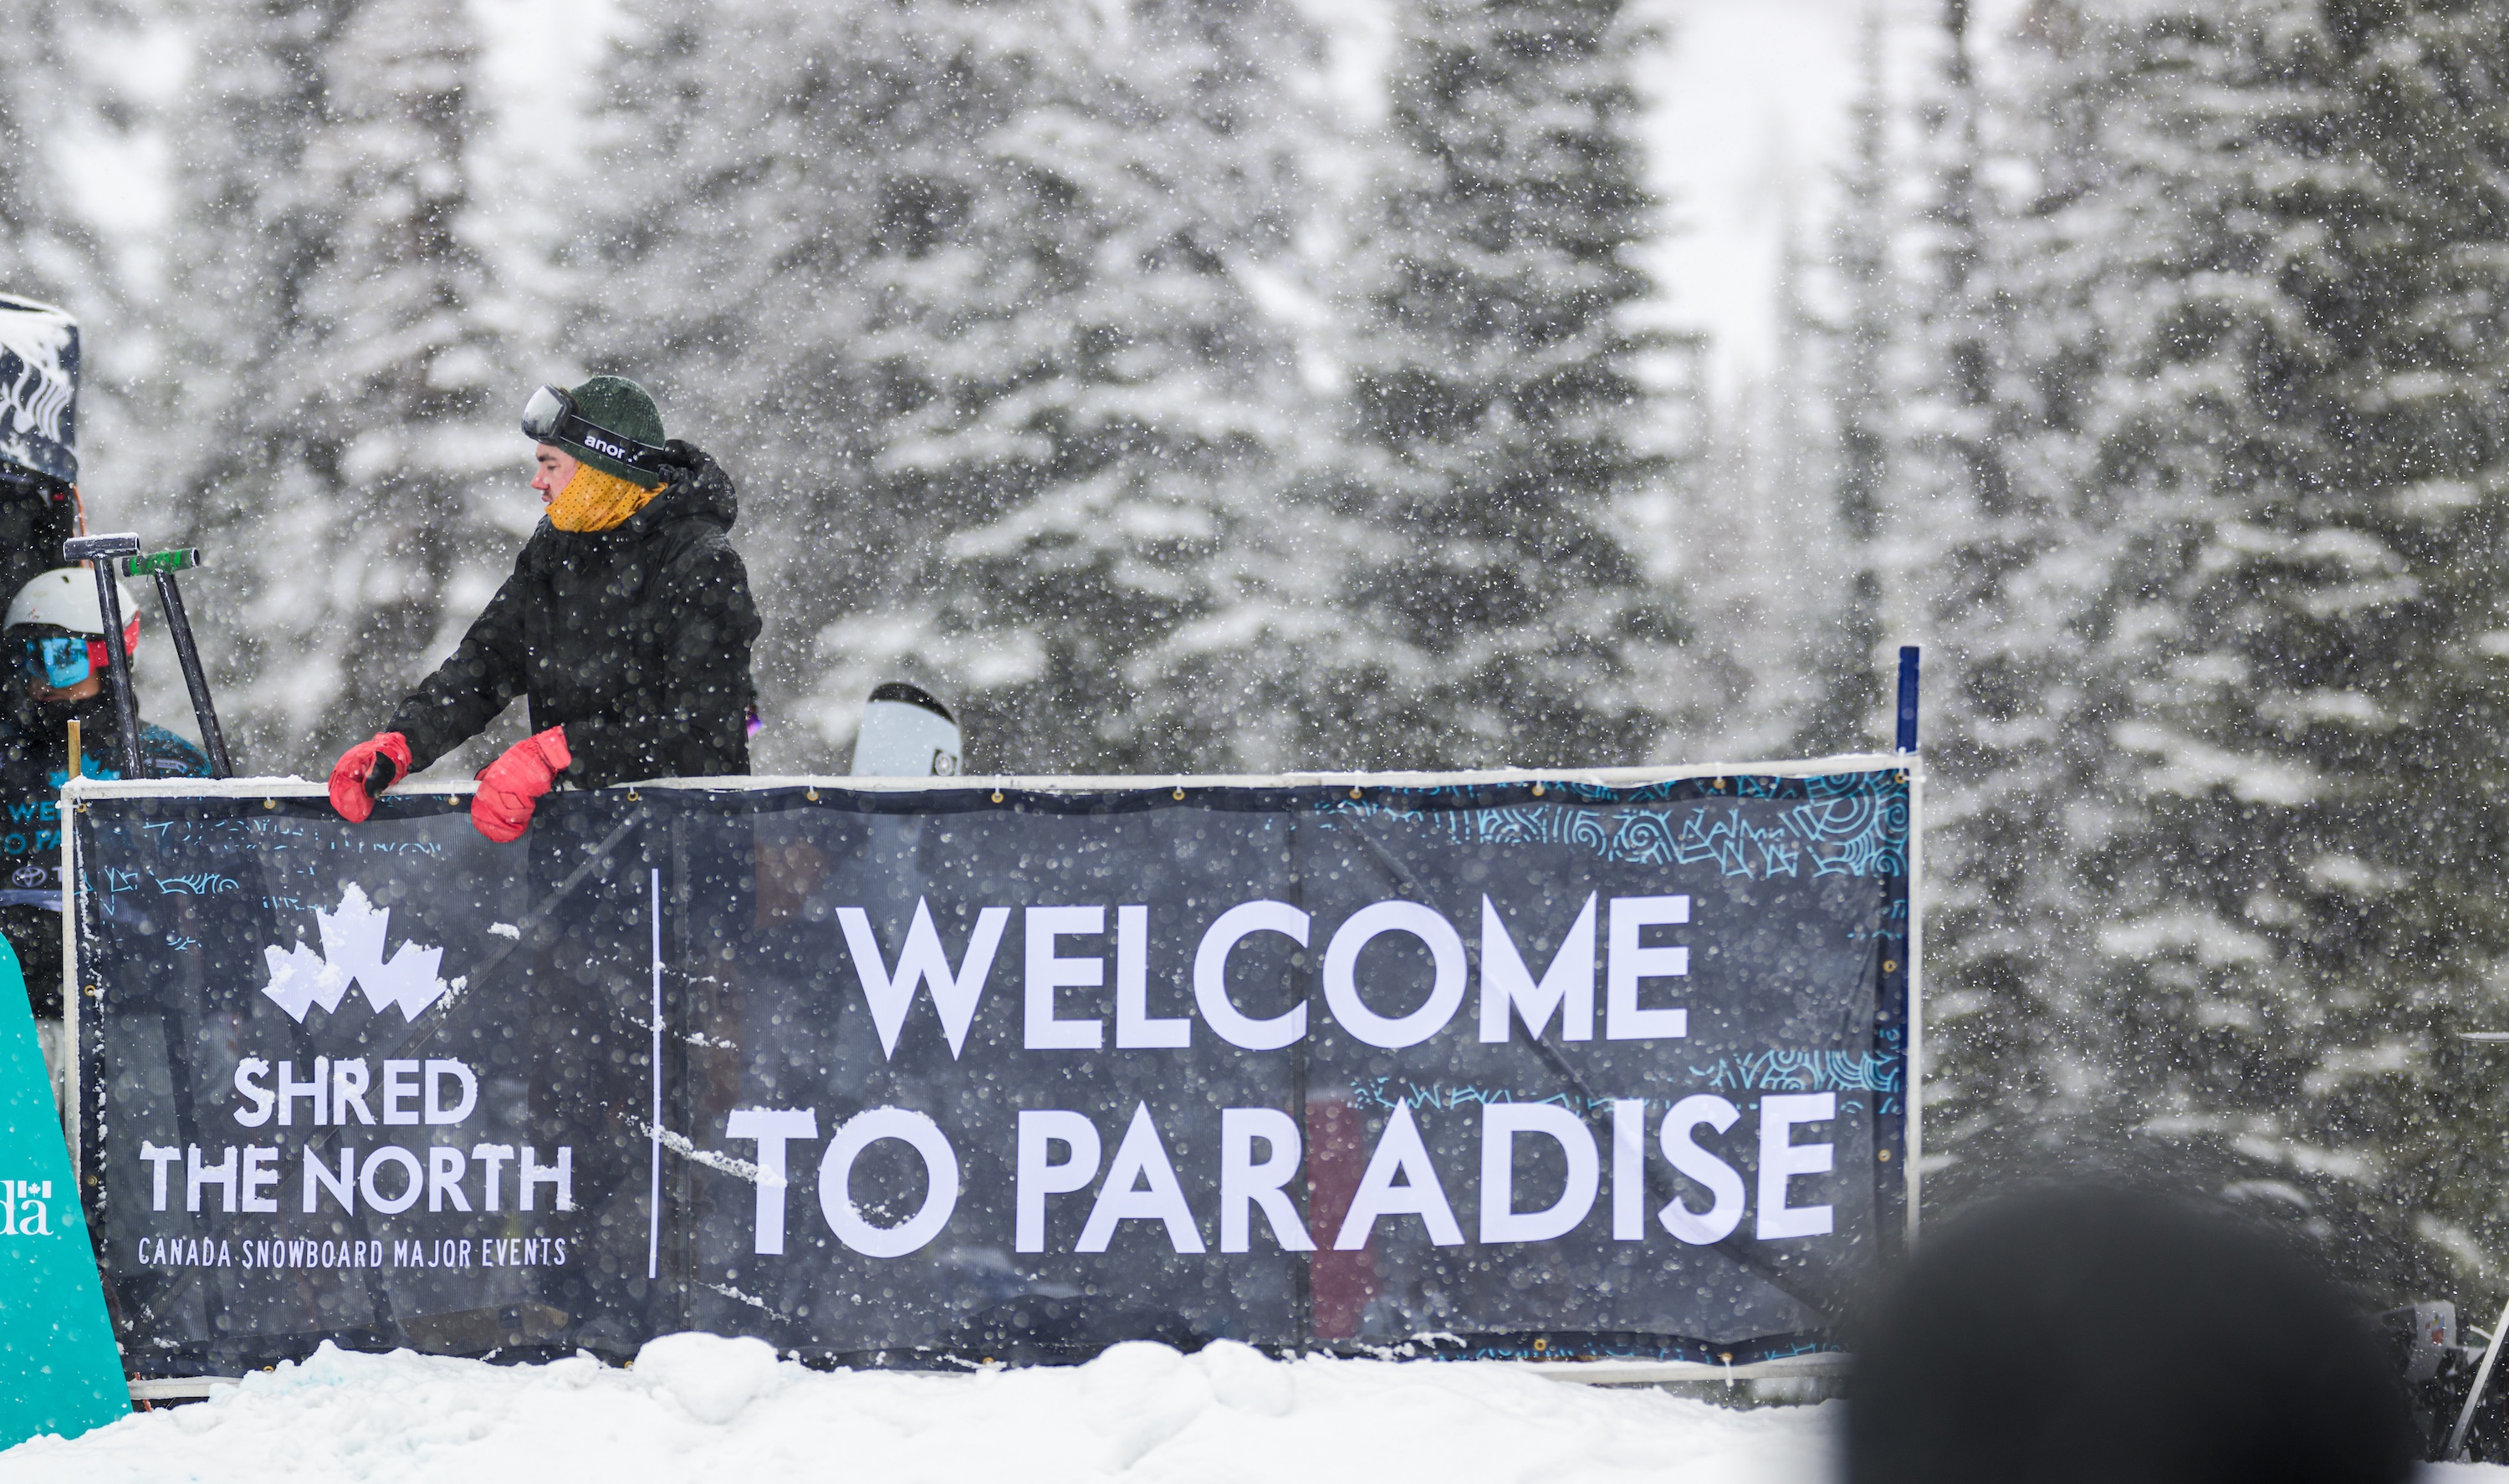 a sign that says "Welcome to Paradise" in front of snowy trees